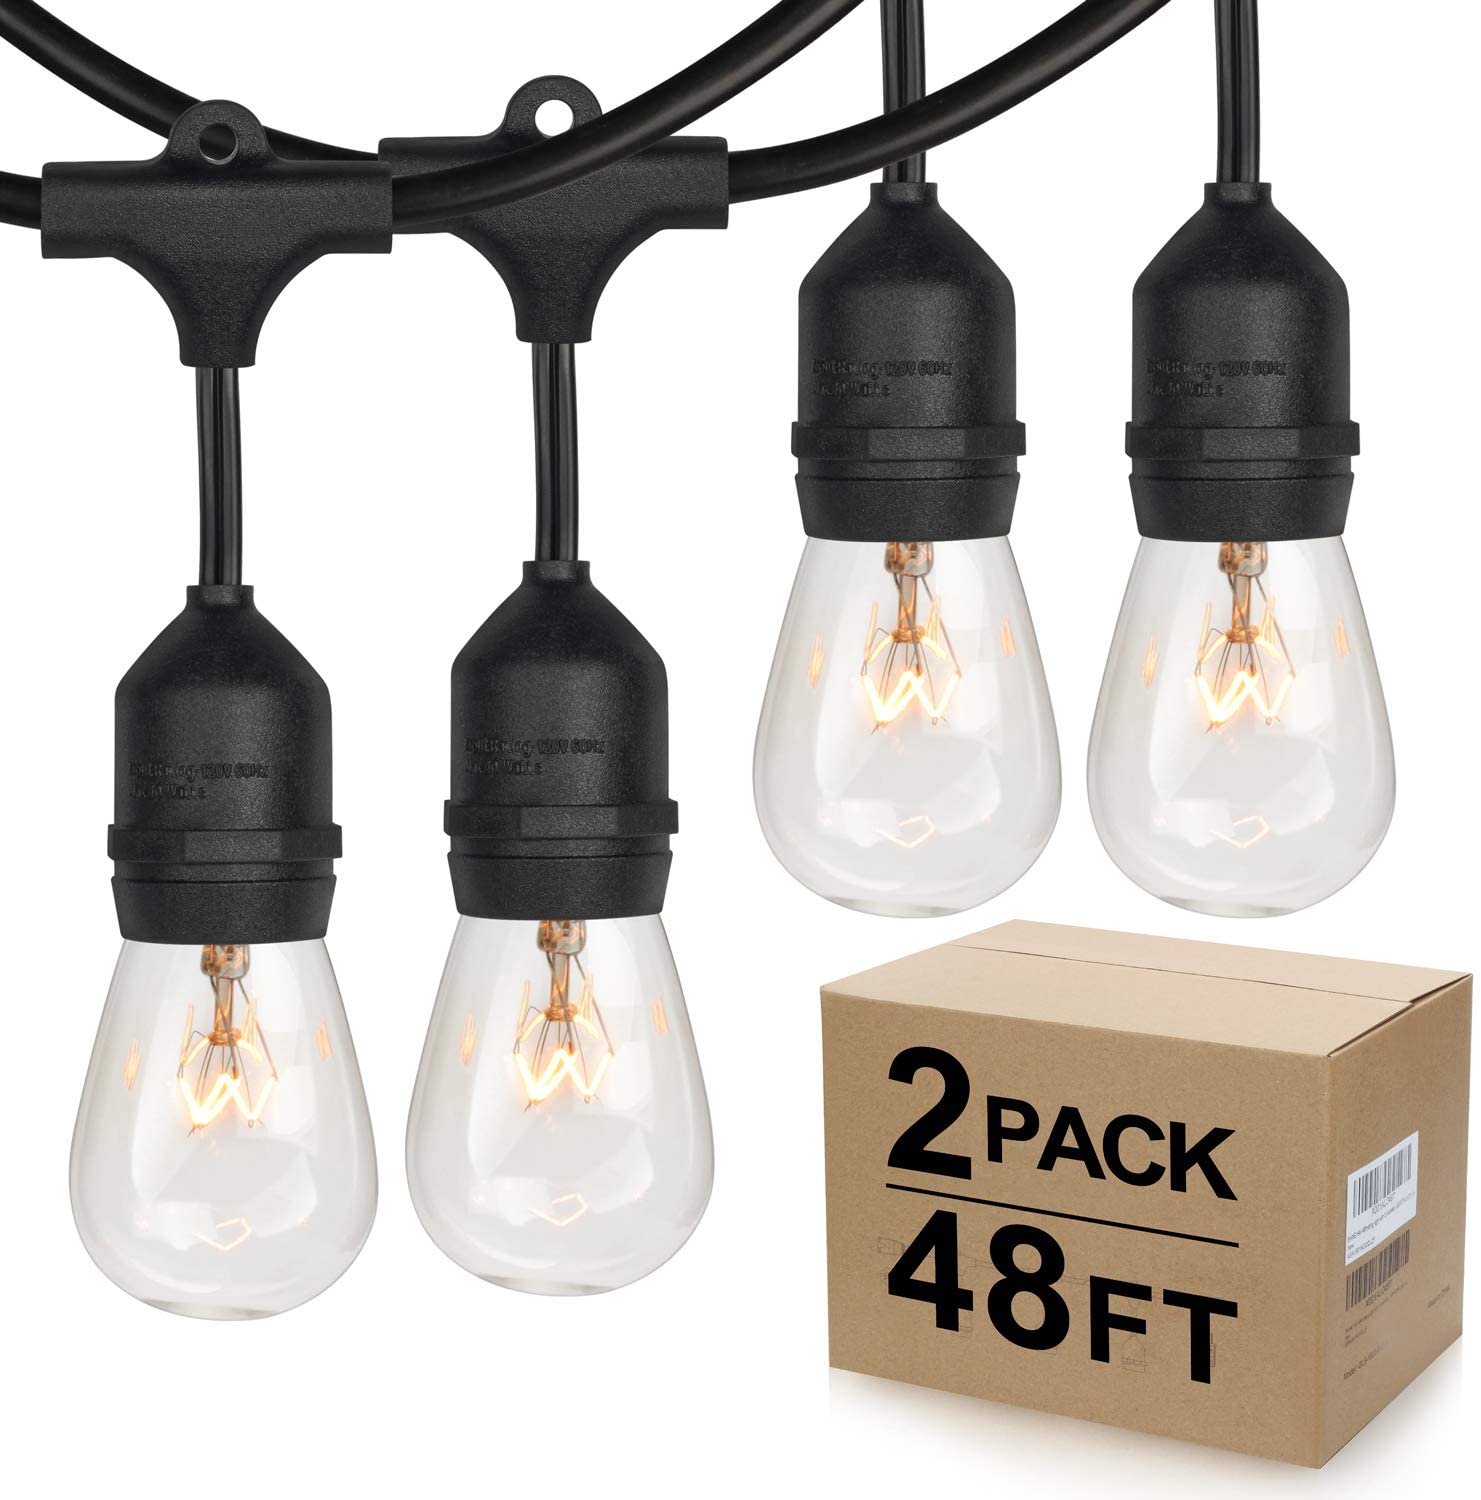 The Best Outdoor String Lights, Low Voltage Led Patio String Lights